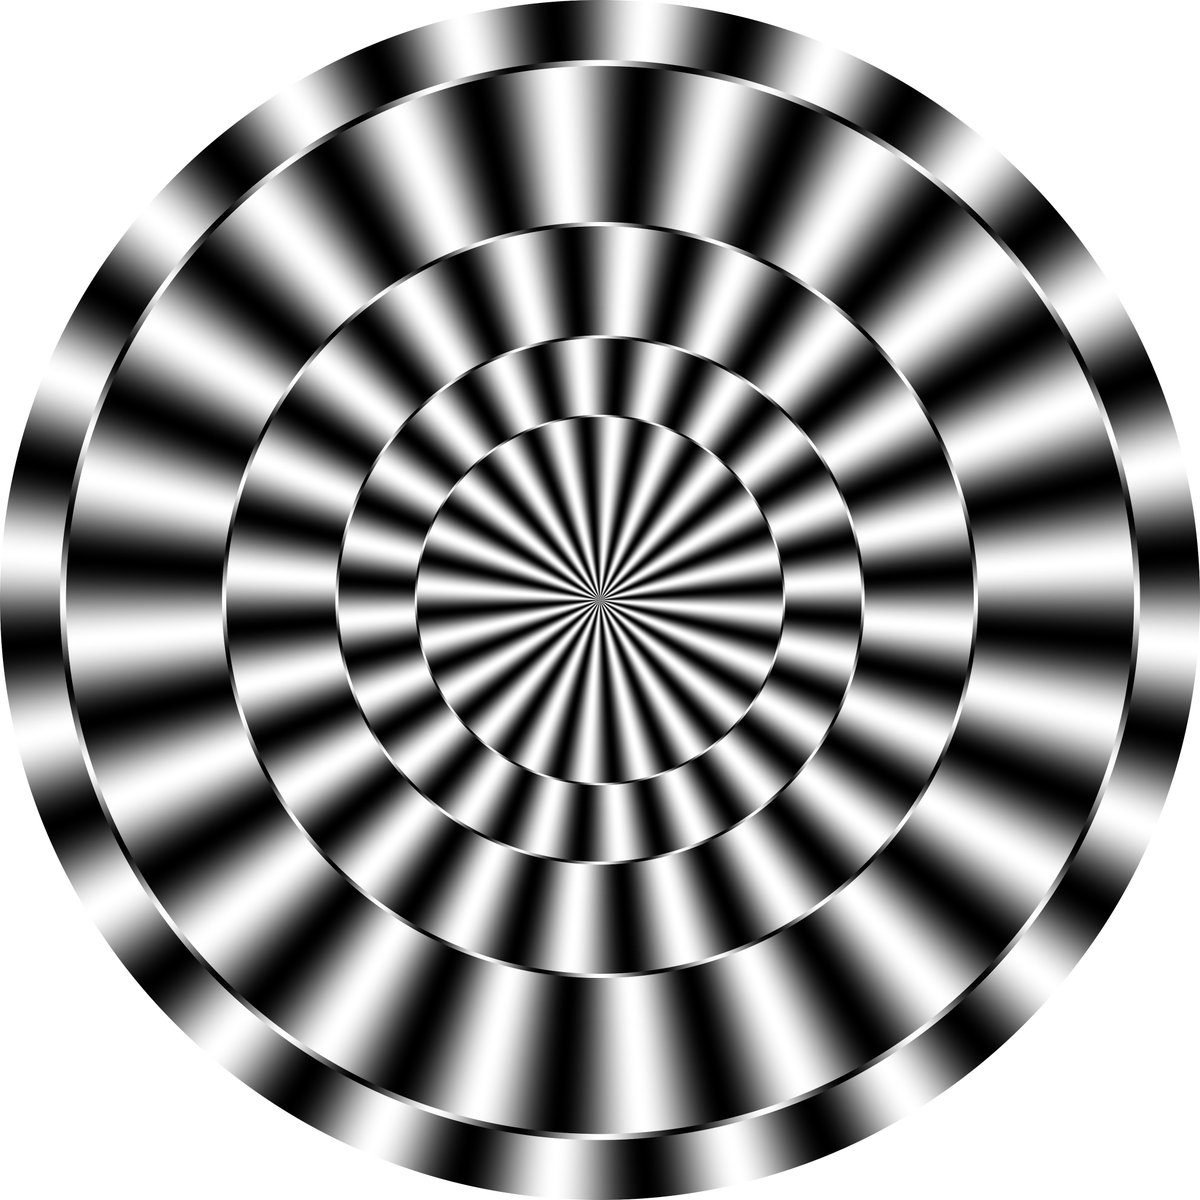 Concentric circles appear to be entangled.